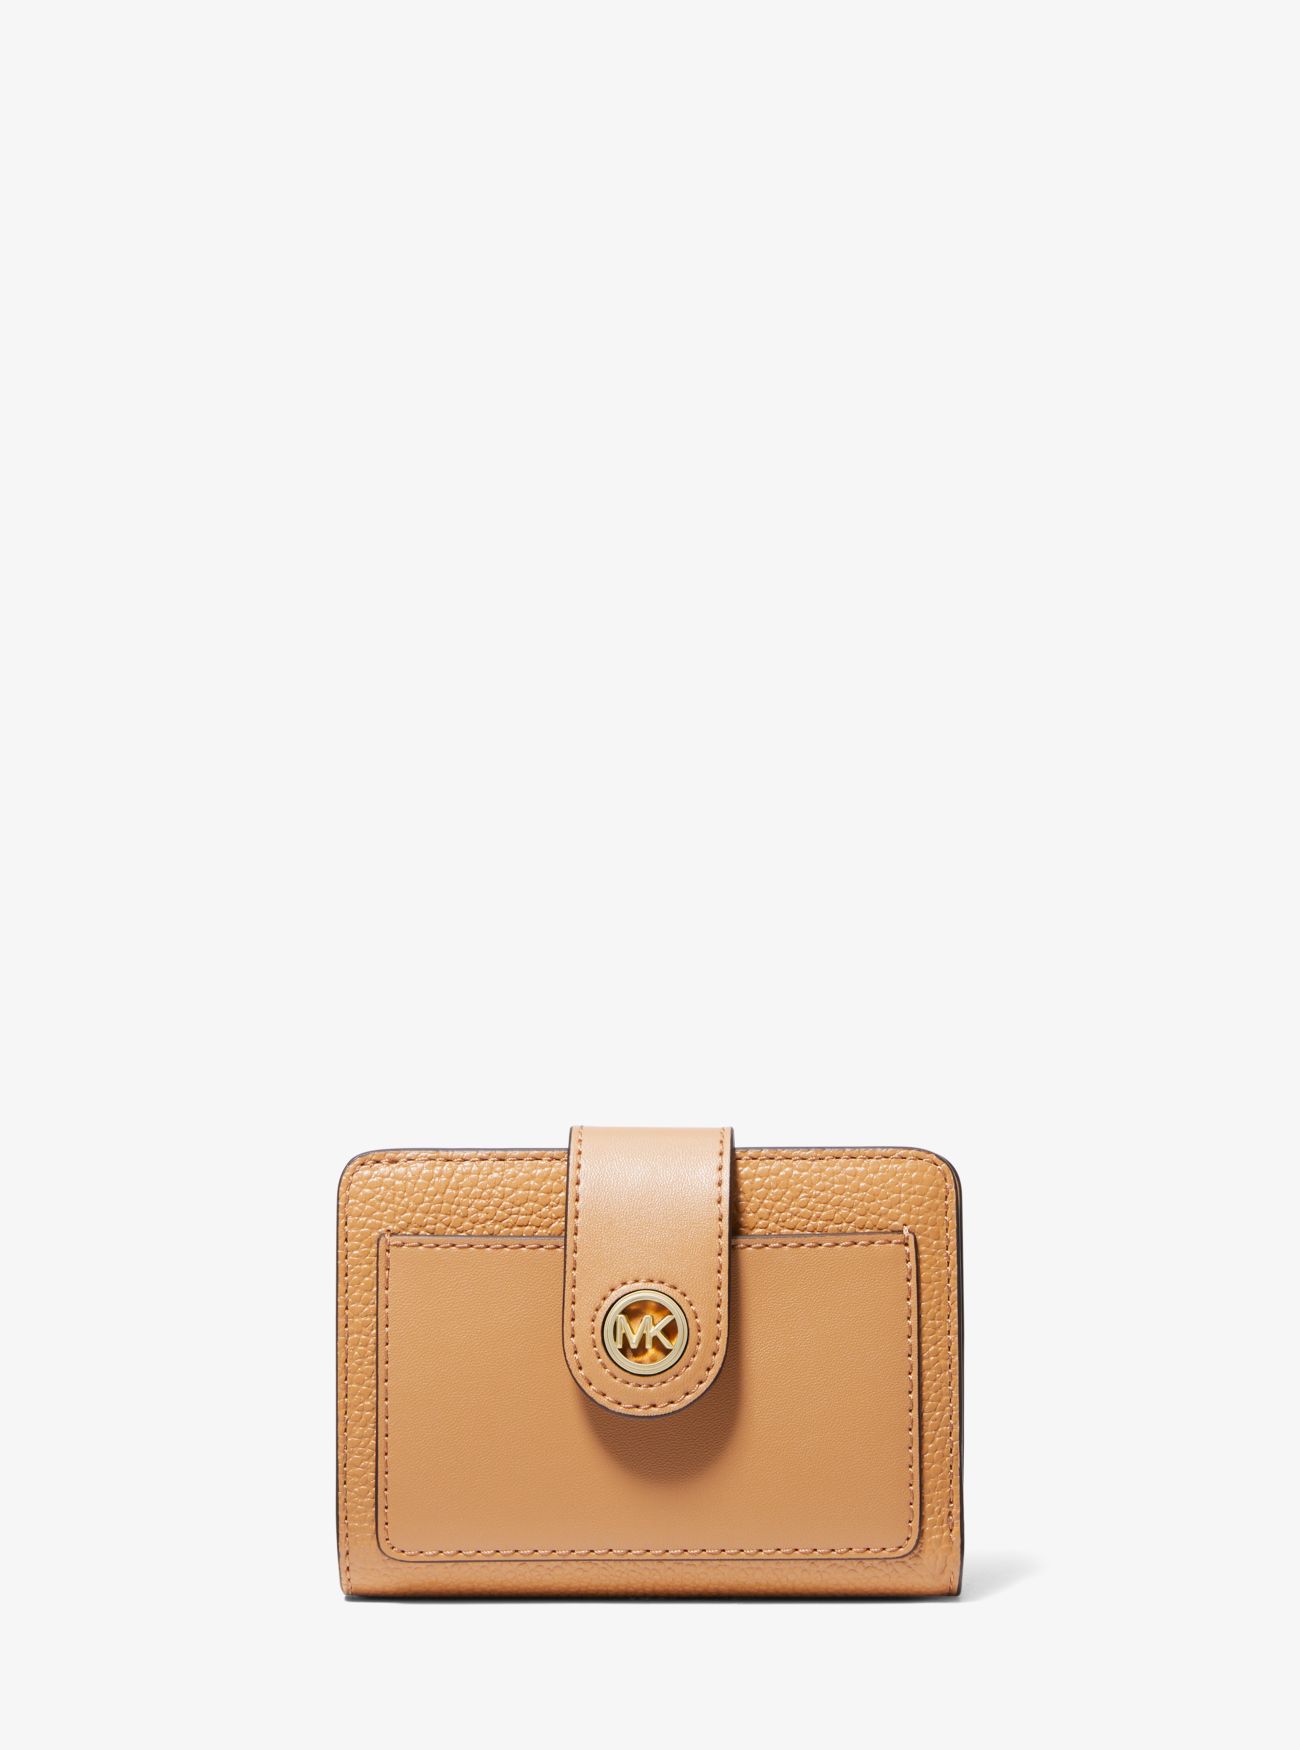 MK Small Leather Wallet - Brown - Michael Kors